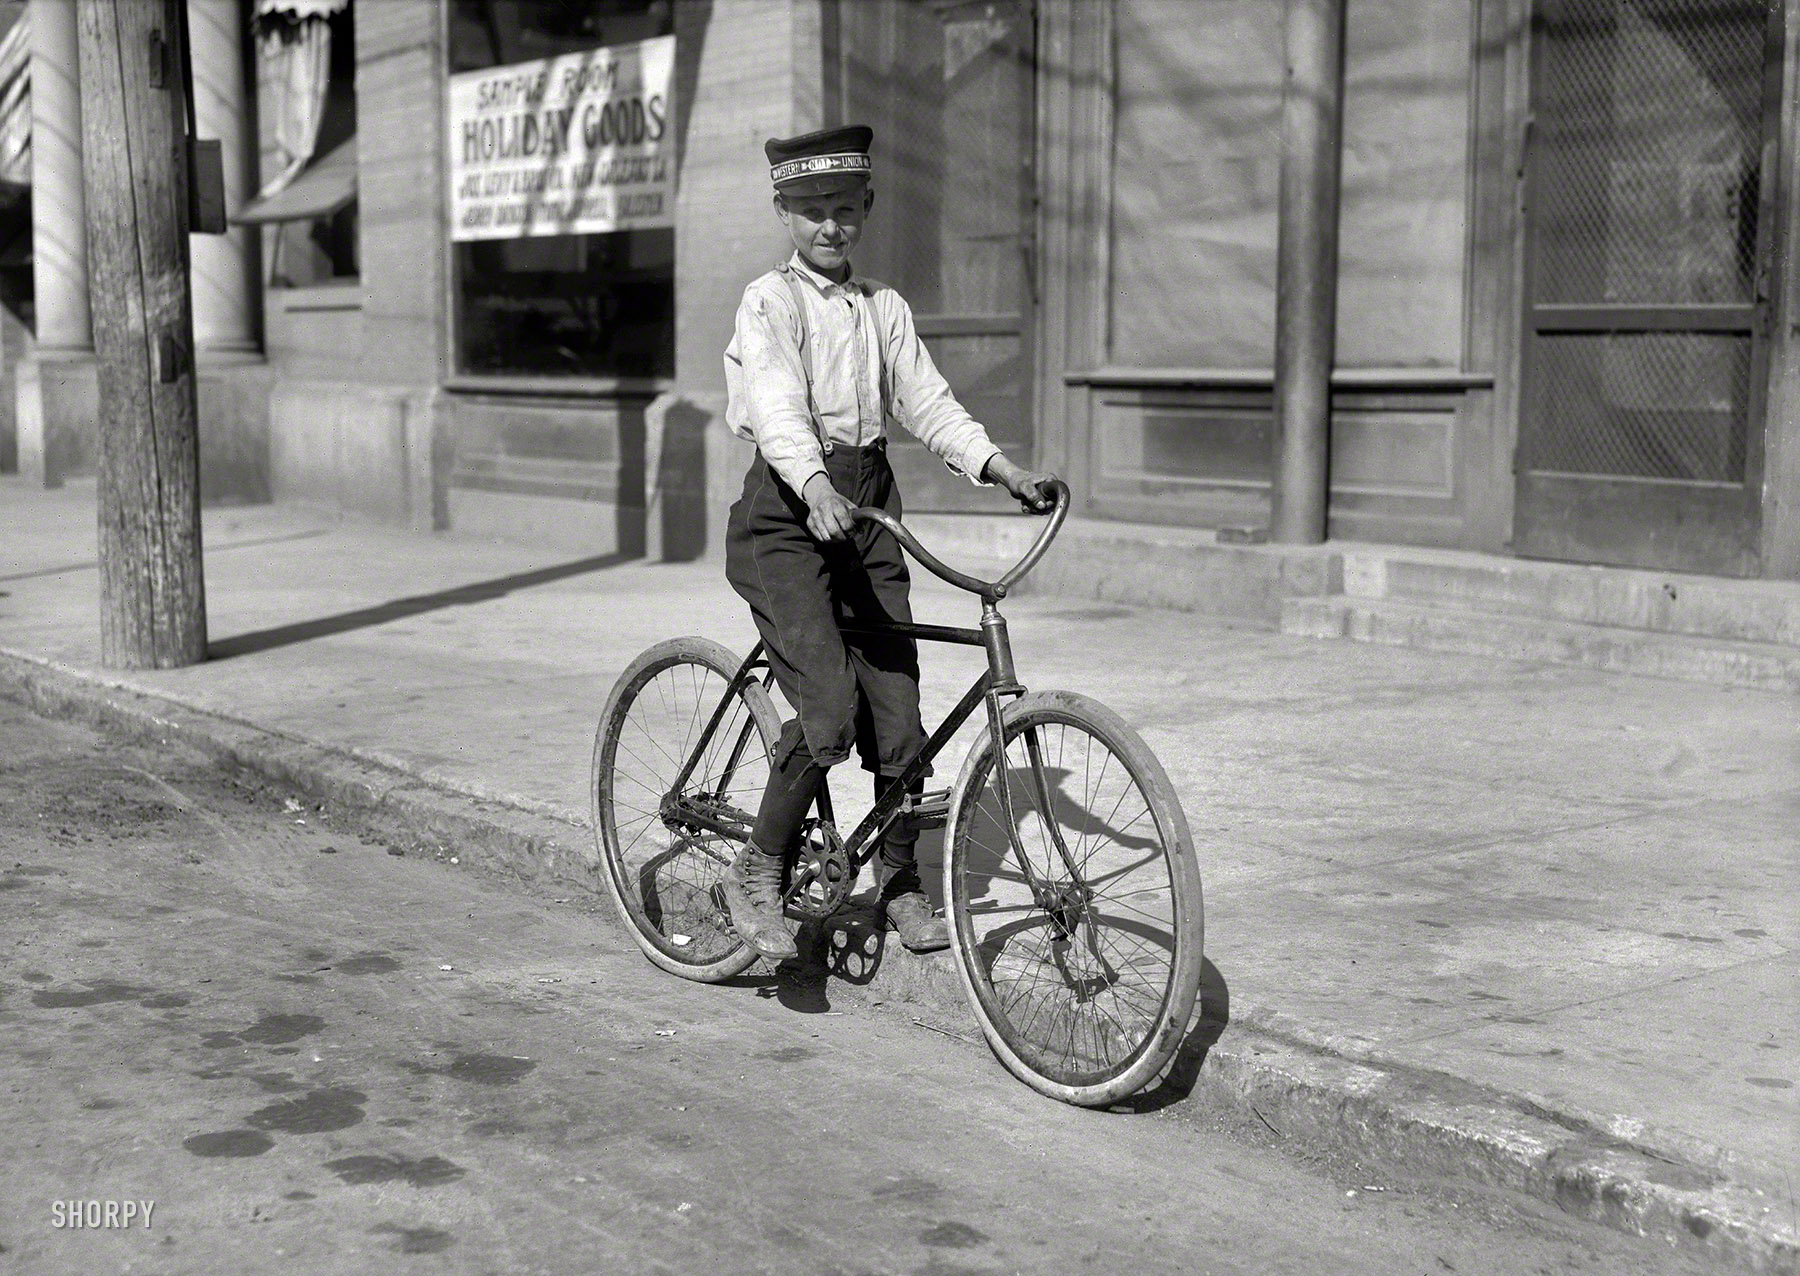 November 1913. Shreveport, Louisiana. "Western Union messenger No. 2, fourteen years old. Says he goes to the Red Light district all the time." Glass negative by Lewis Wickes Hine for the National Child Labor Committee. View full size.